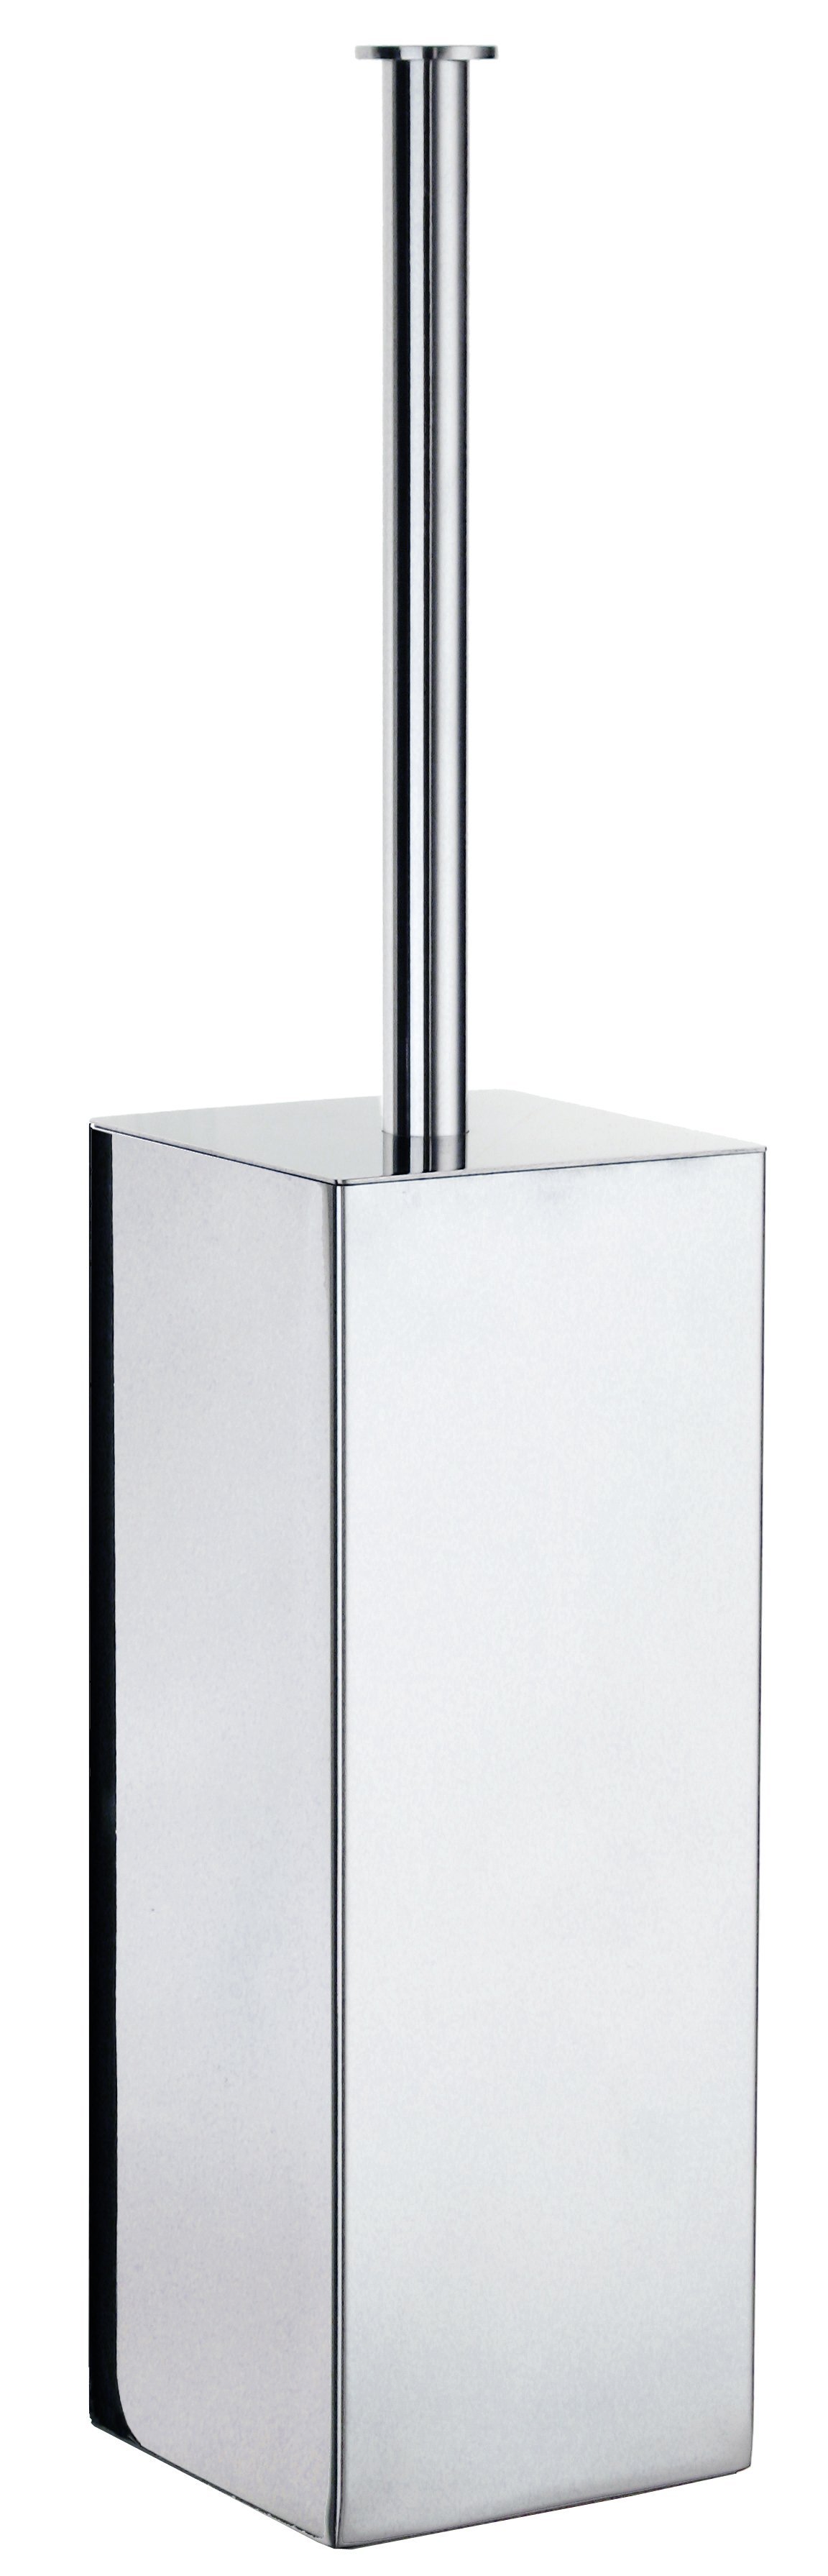 Lite Toilet Brush in Stainless Steel Polished